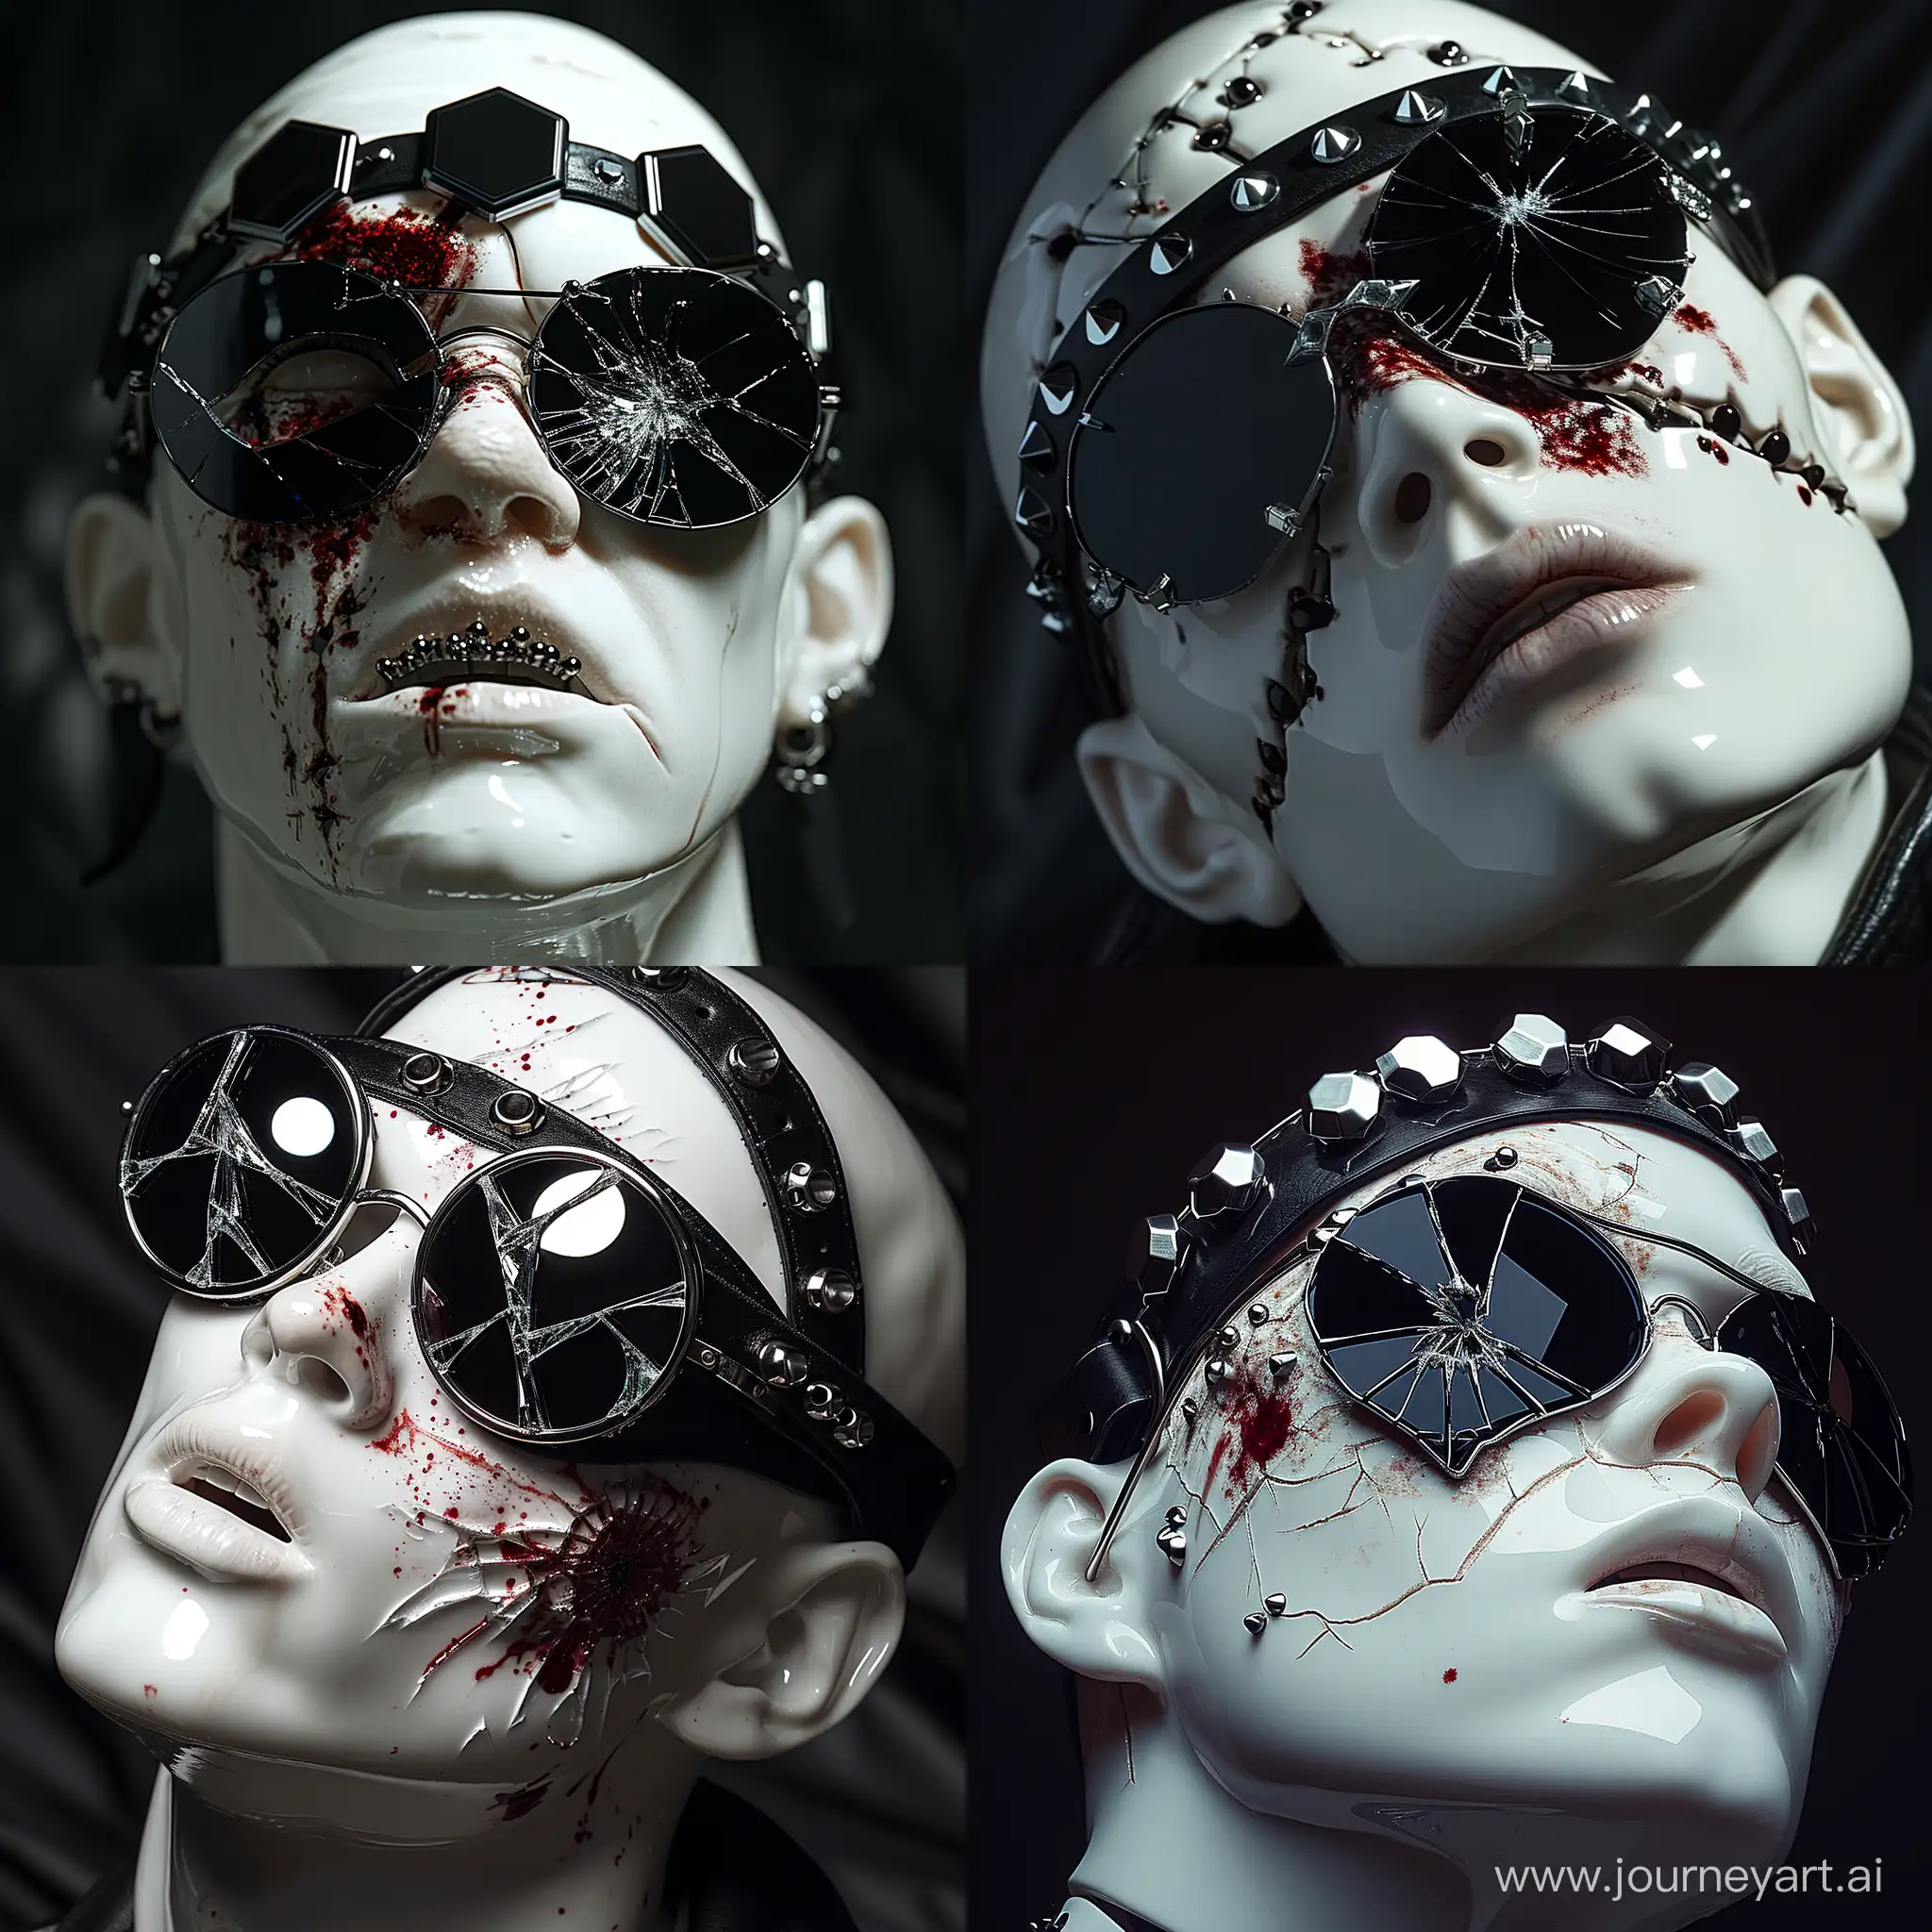 Realistic close-up photo of a white porcelain man's face, wearing black mirrored glasses with broken lenses reflecting a large bloodstain with a thick black leather headband on the forehead with two rows of round studs and chrome hexagons, ebony background, dramatic shadows, professional photo, HDR, Bokeh, shallow depth of field, ultra realistic